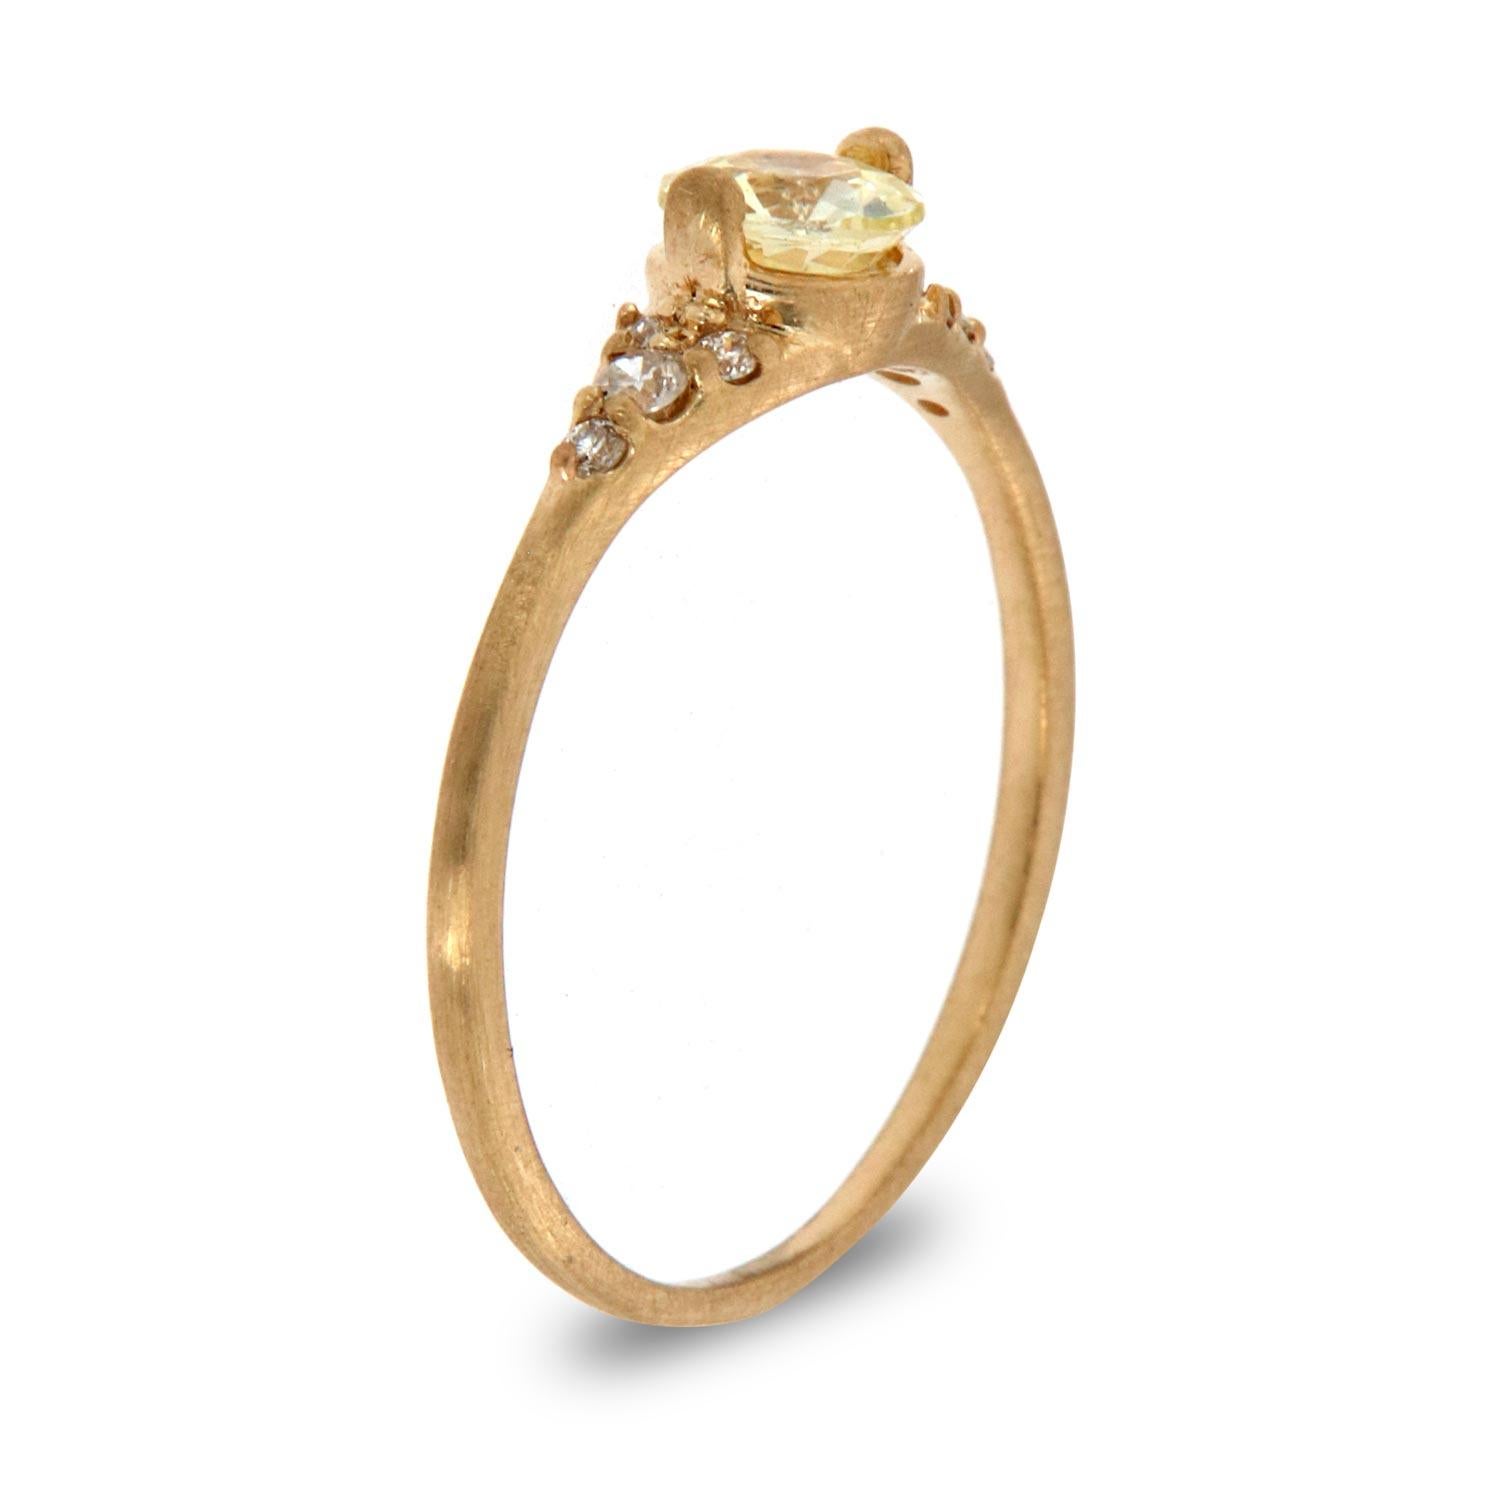 This petite oraganic style rustic ring is impressive in its vintage appeal, featuring a natural yellow round sapphire, accented with round brilliant diamonds. Experience the difference in person!

Product details: 

Center Gemstone Type: